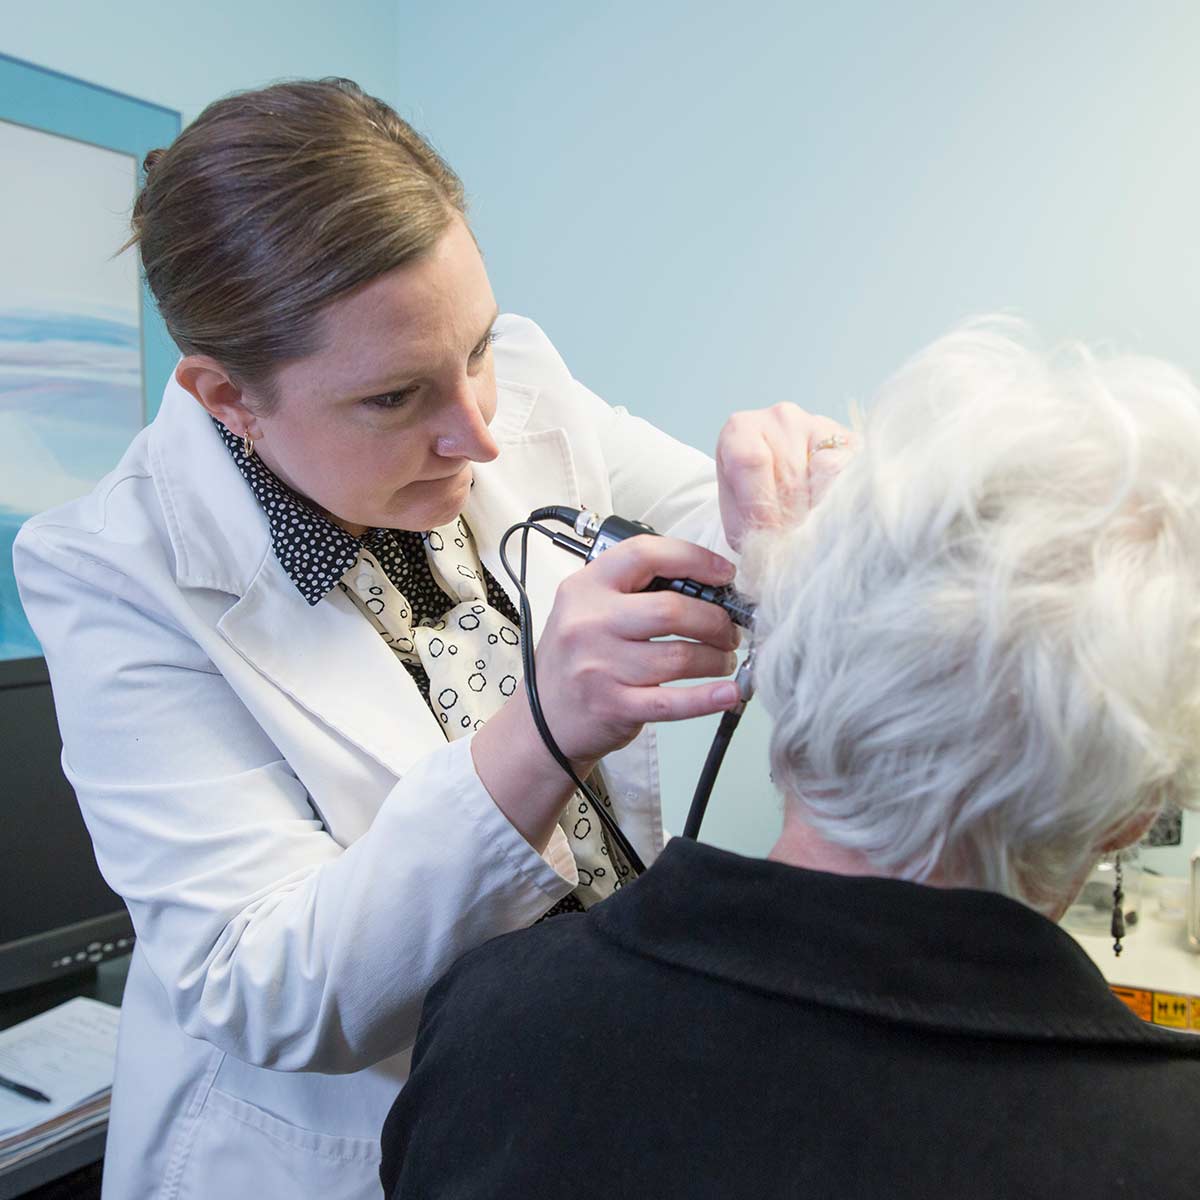 An audiology student conducts a hearing exam on an elderly patient at the clinic on campus